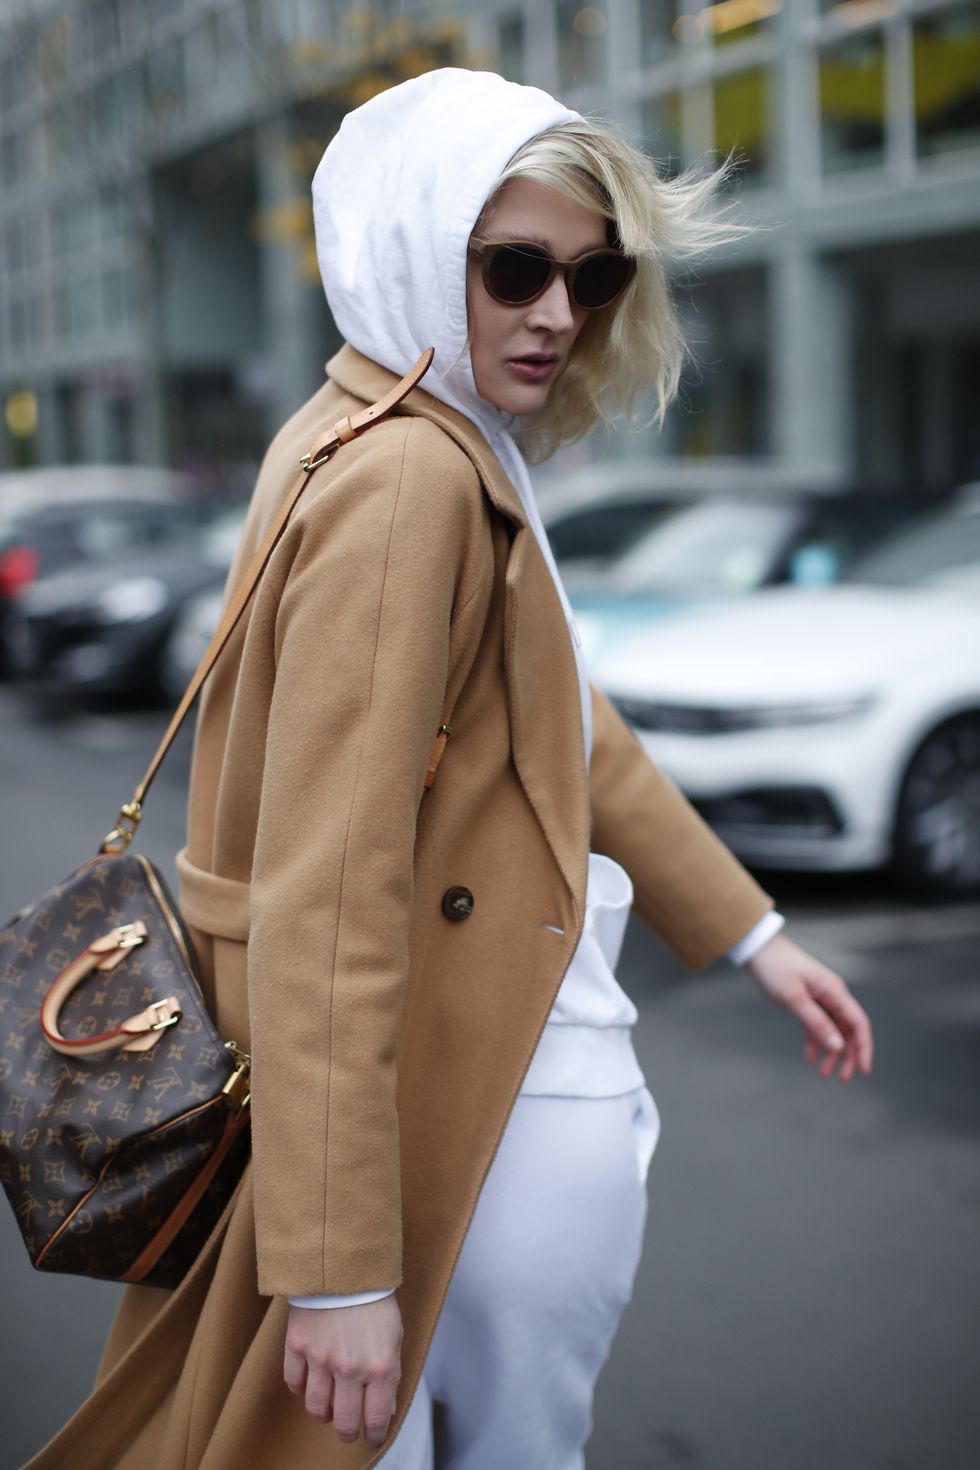 berlin, germany   december 11 german model and actress victoria jancke wearing a white hoodie by asos, white pants by asos, white socks by wrangler, a camel colored long coat by vero moda, a light and dark brown speedy 30 monogram canvas bag by louis vuitton and brown bamboo "u2018goldie"u2019 sunglasses by truespinduring a street style shooting on december 11, 2020 in berlin, germany photo by streetstyleshootersgetty images